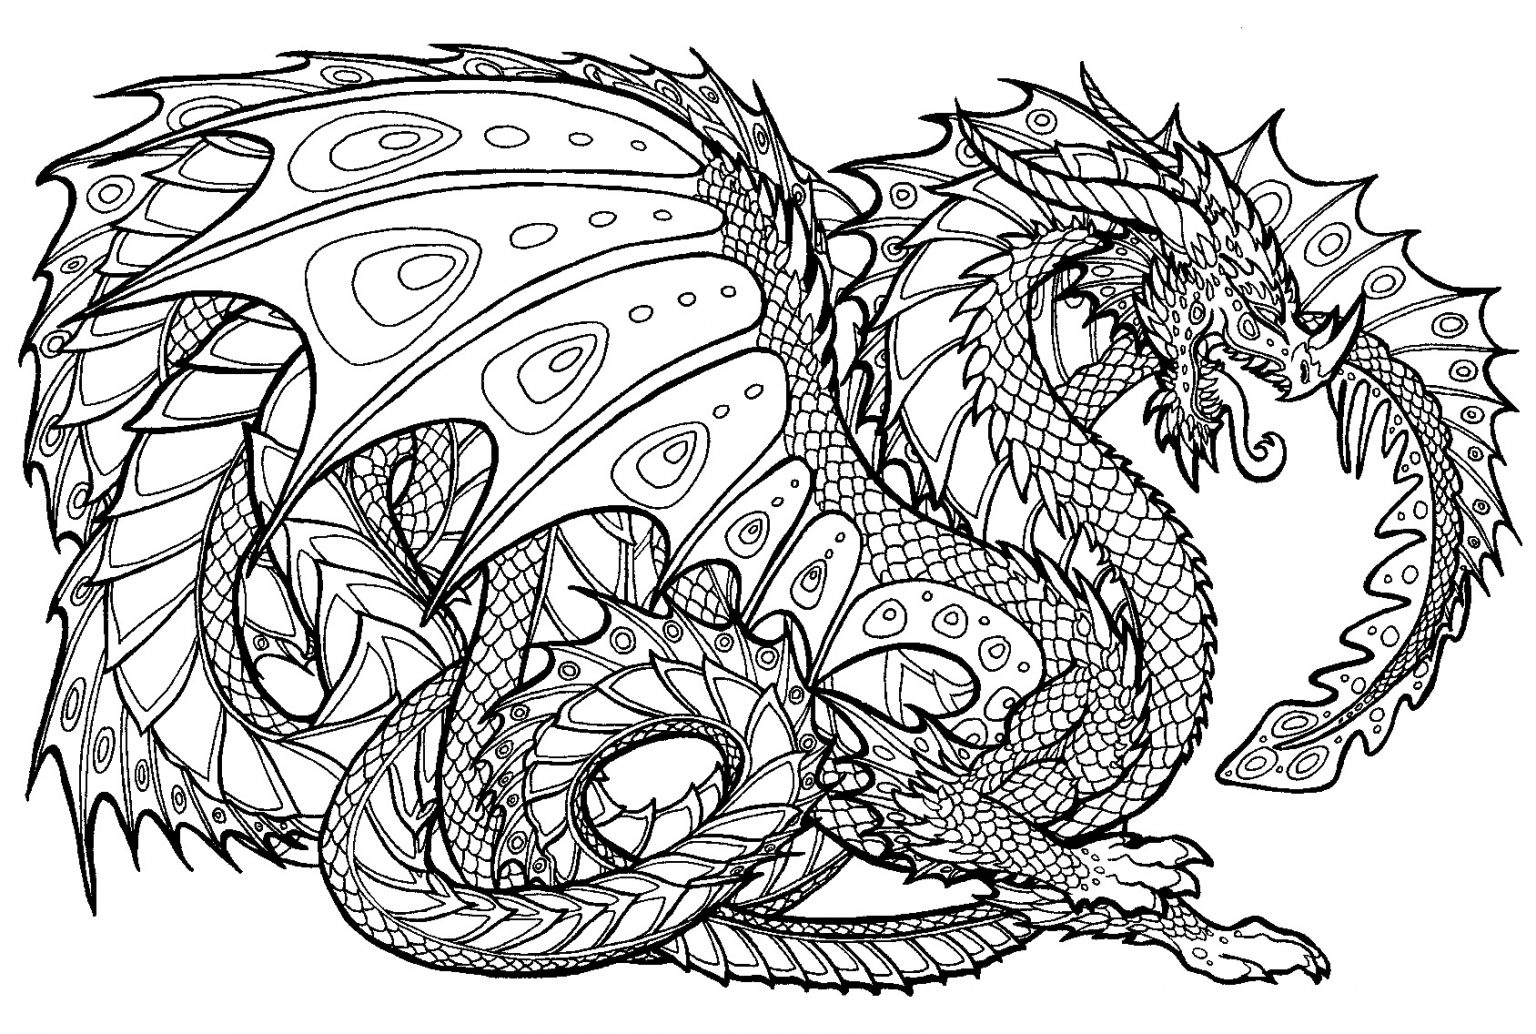 Dragon penguin coloring page